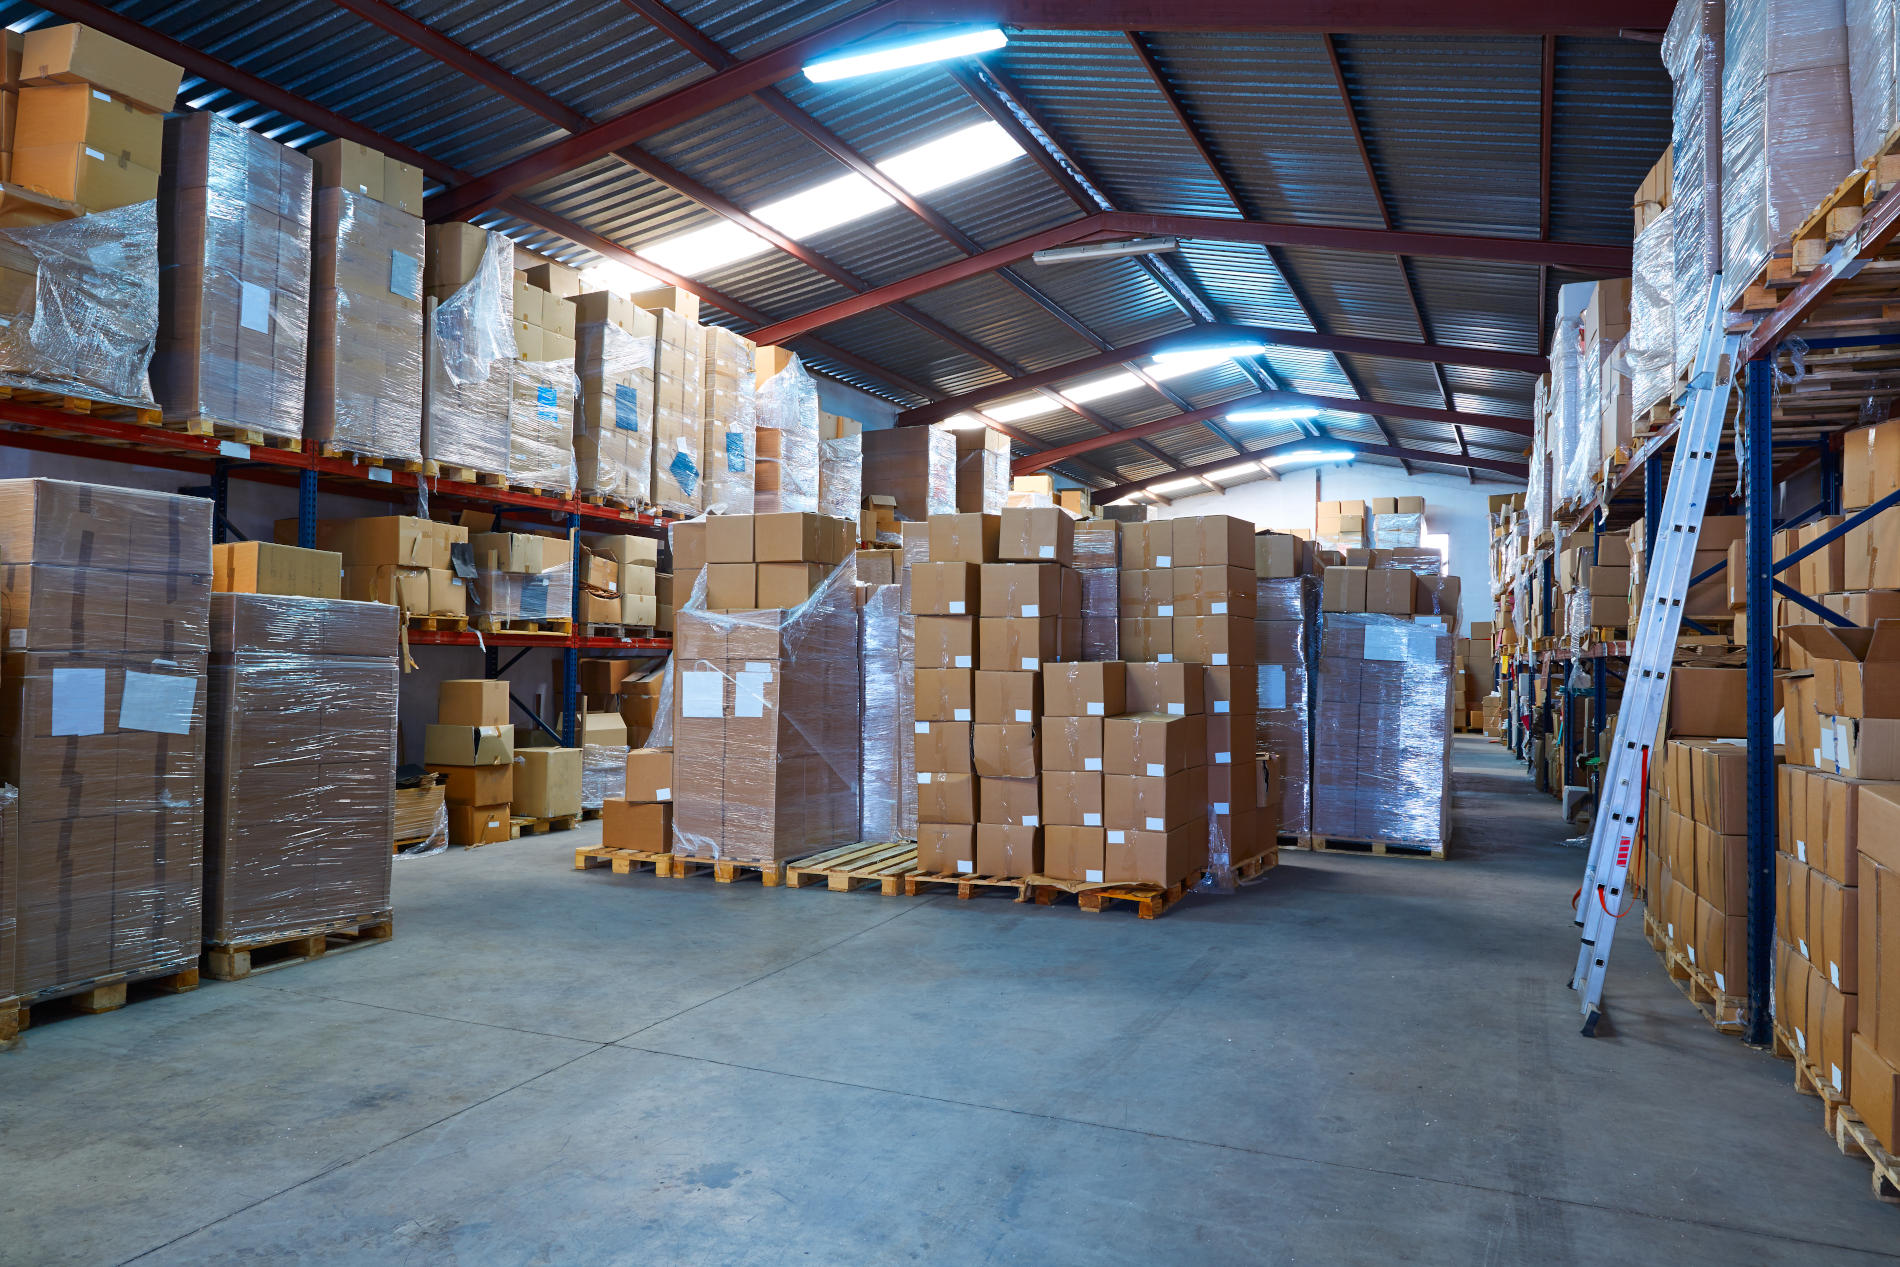 Warehouse stograge with stacked boxes in rows